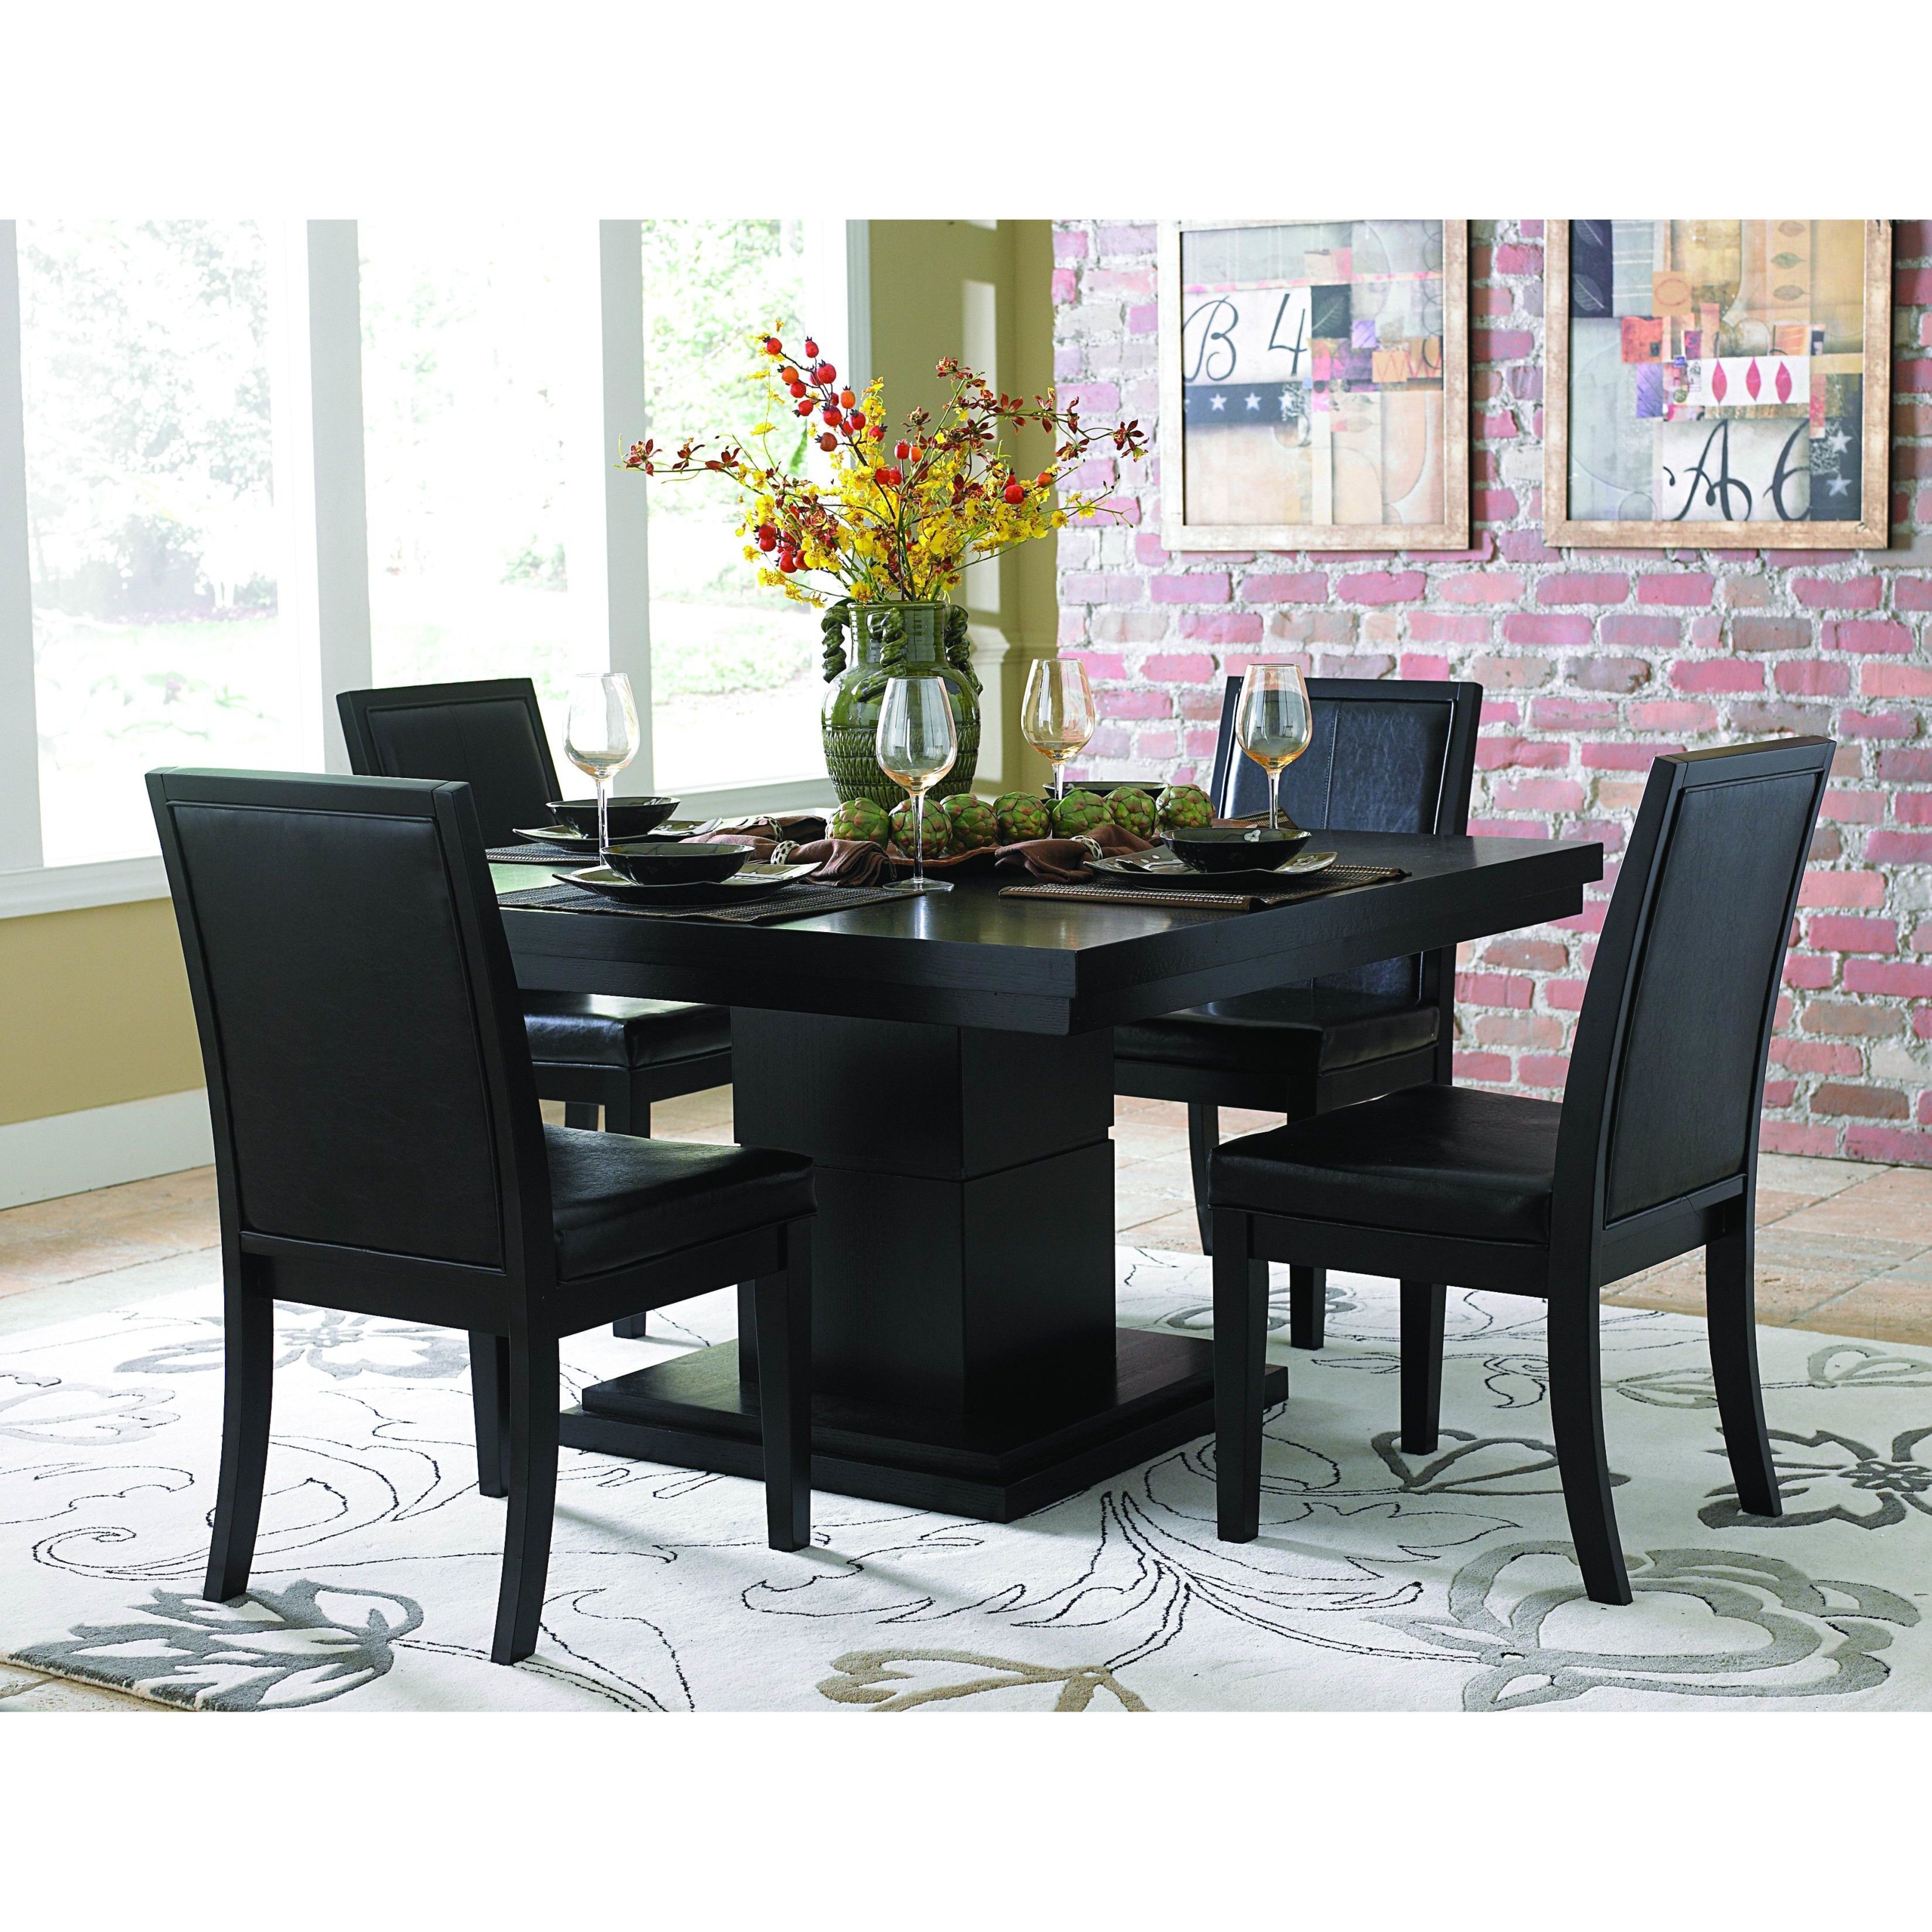 Square Pedestal Dining Table Ideas On Foter